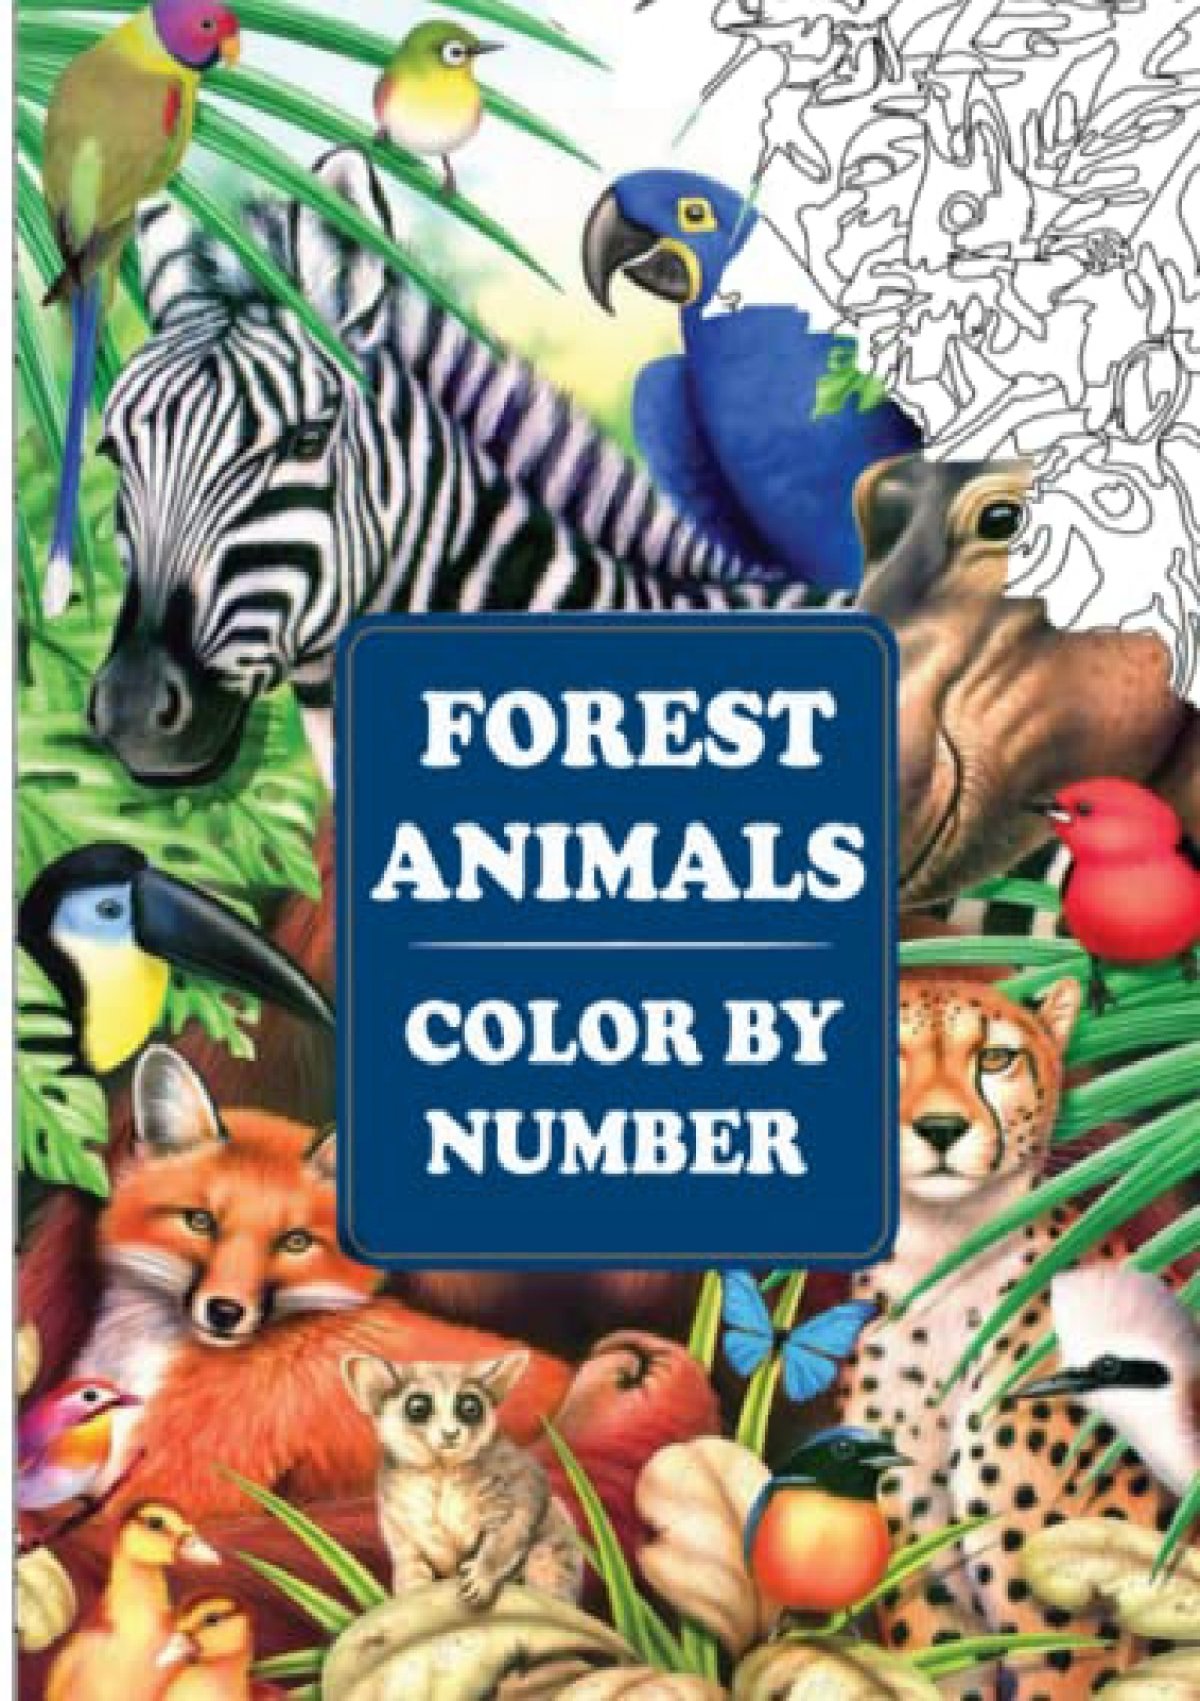 downloadpdf-forest-animals-color-by-number-an-adult-coloring-book-with-fun-easy-and-relaxing